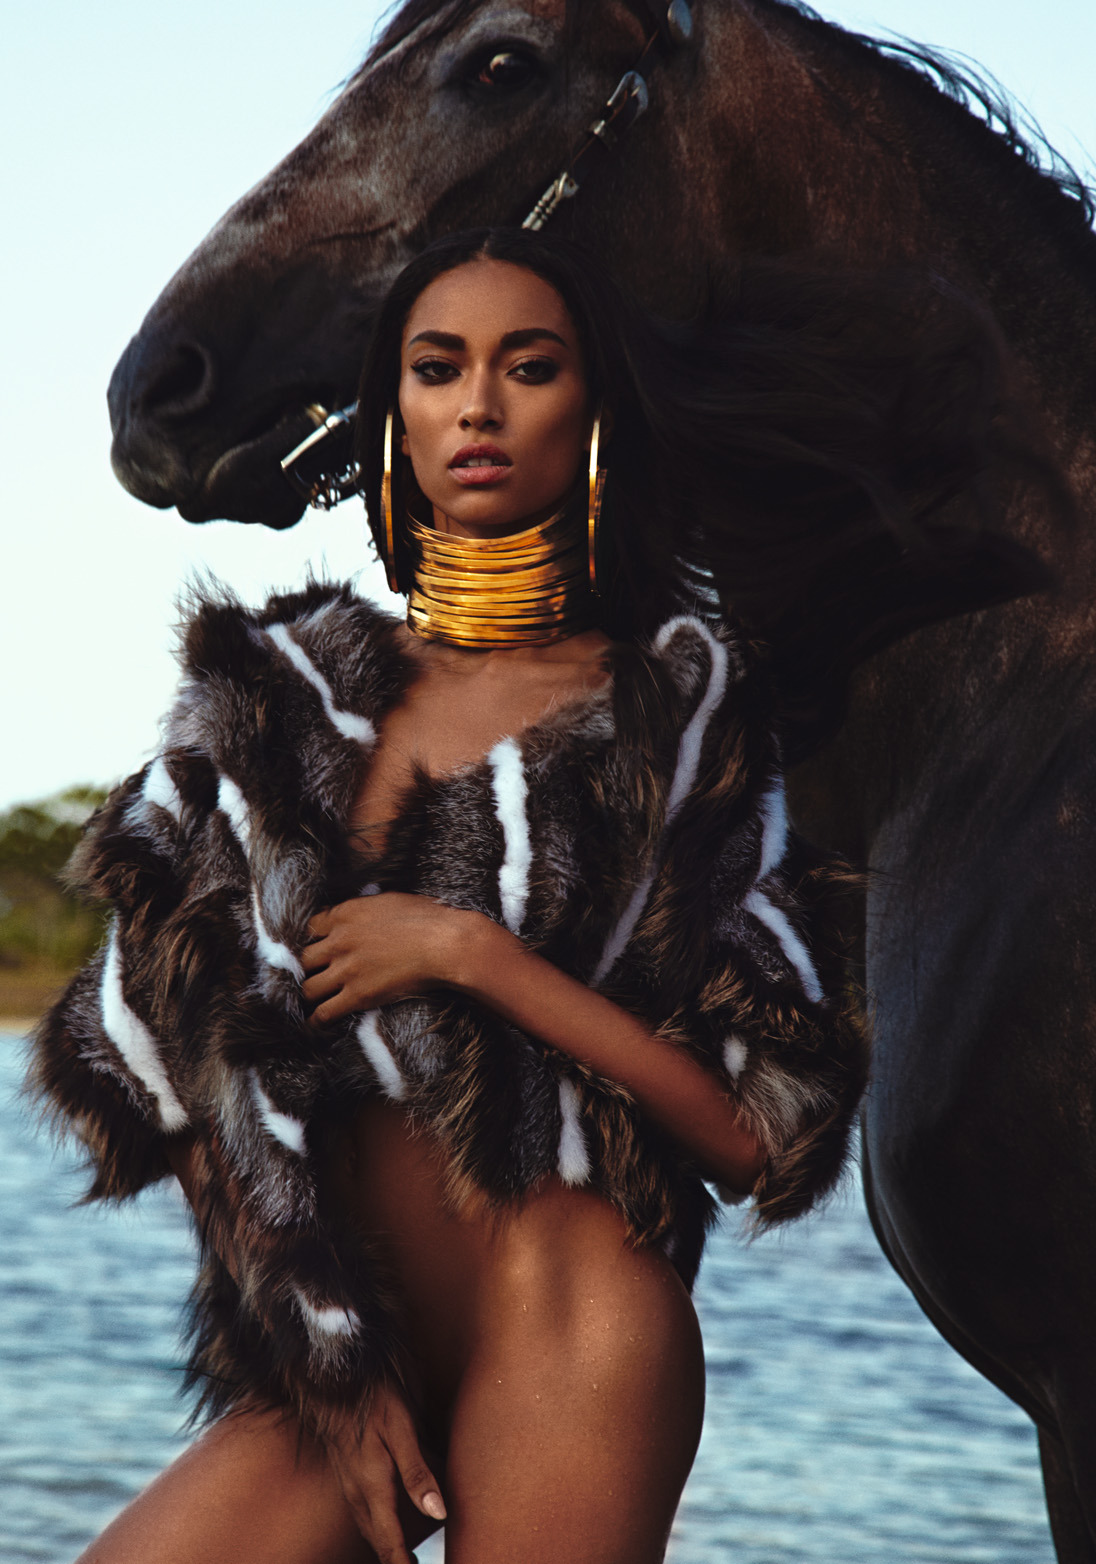 Anais Mali  Photography by Urivaldo Lopes  Published in French Revue De Modes 25